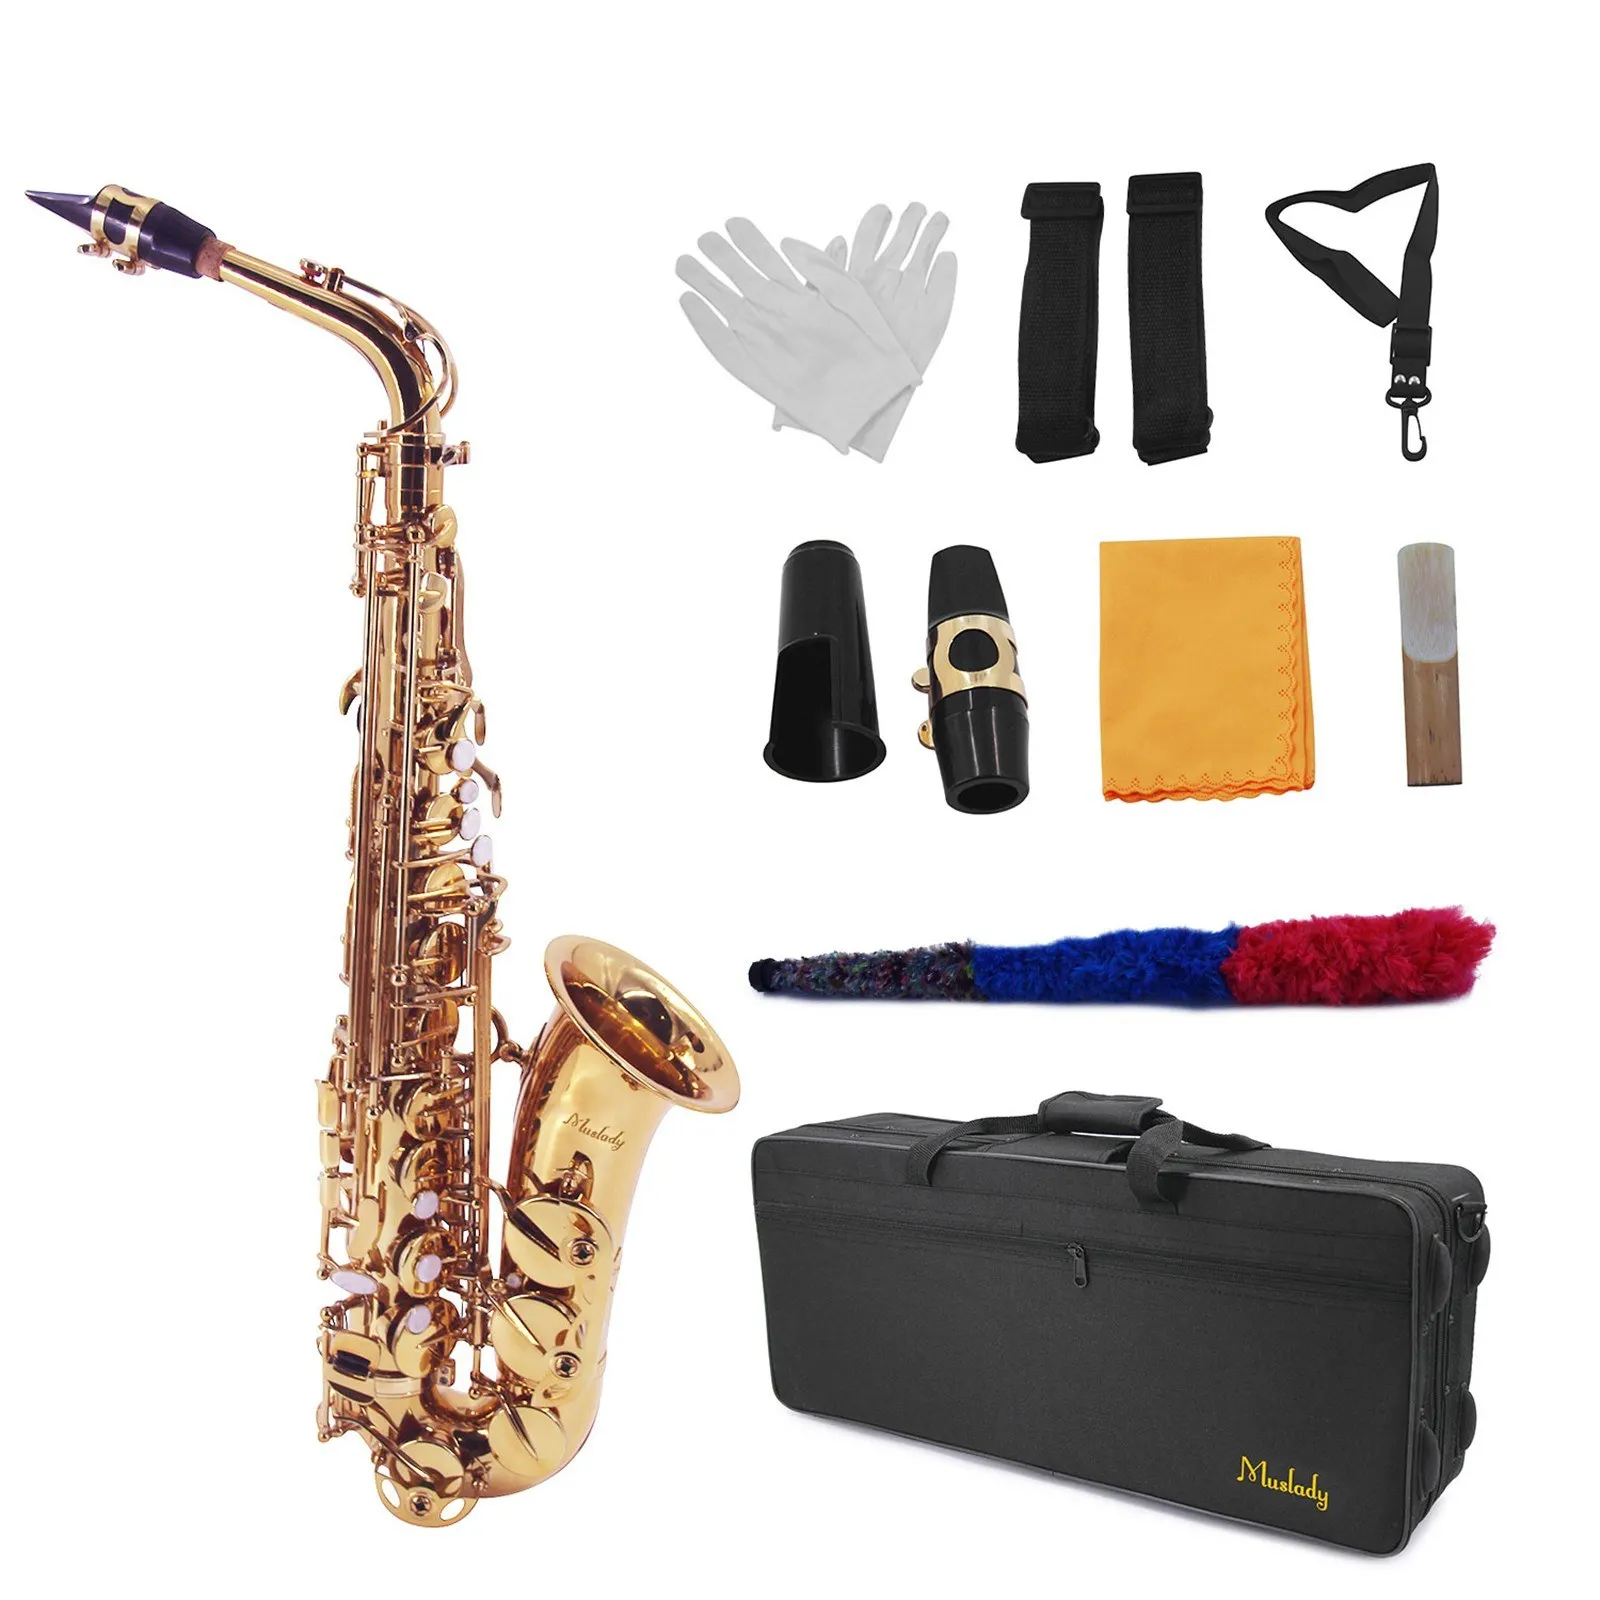 Btuty High Grade Antique Finish Bend Eb E-flat Alto Saxophone Sax Abalone Shell Key Carve Pattern with Case Gloves Cleaning Cloth Straps Brush